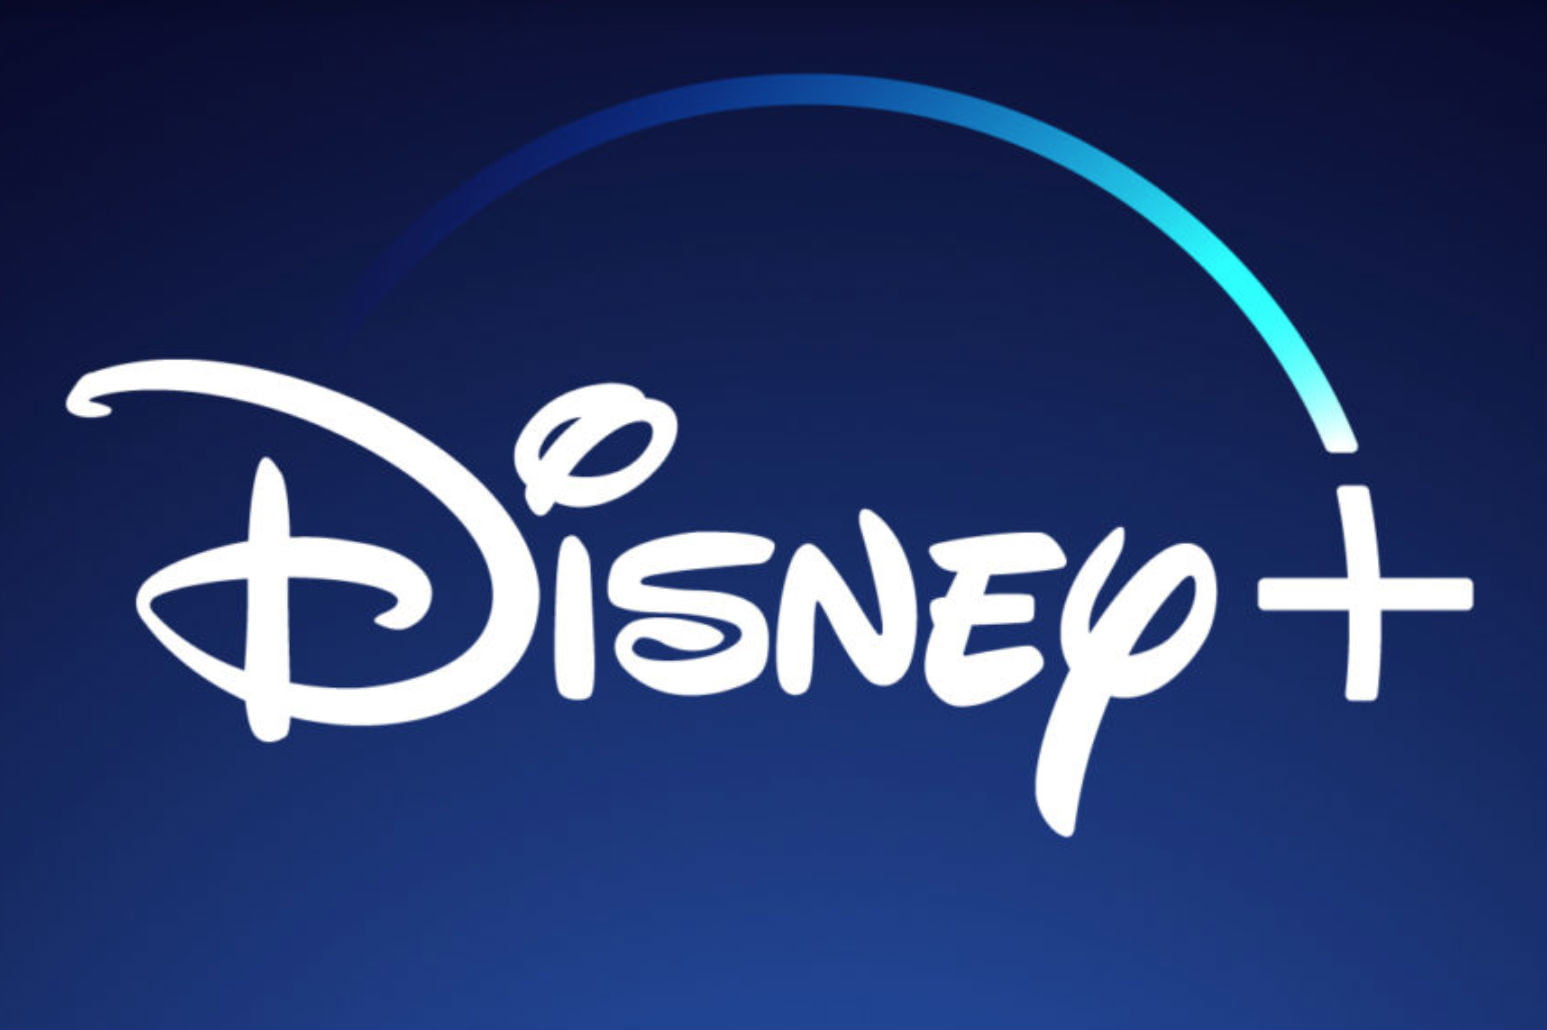 Disney+: Every Title Coming on Launch Day